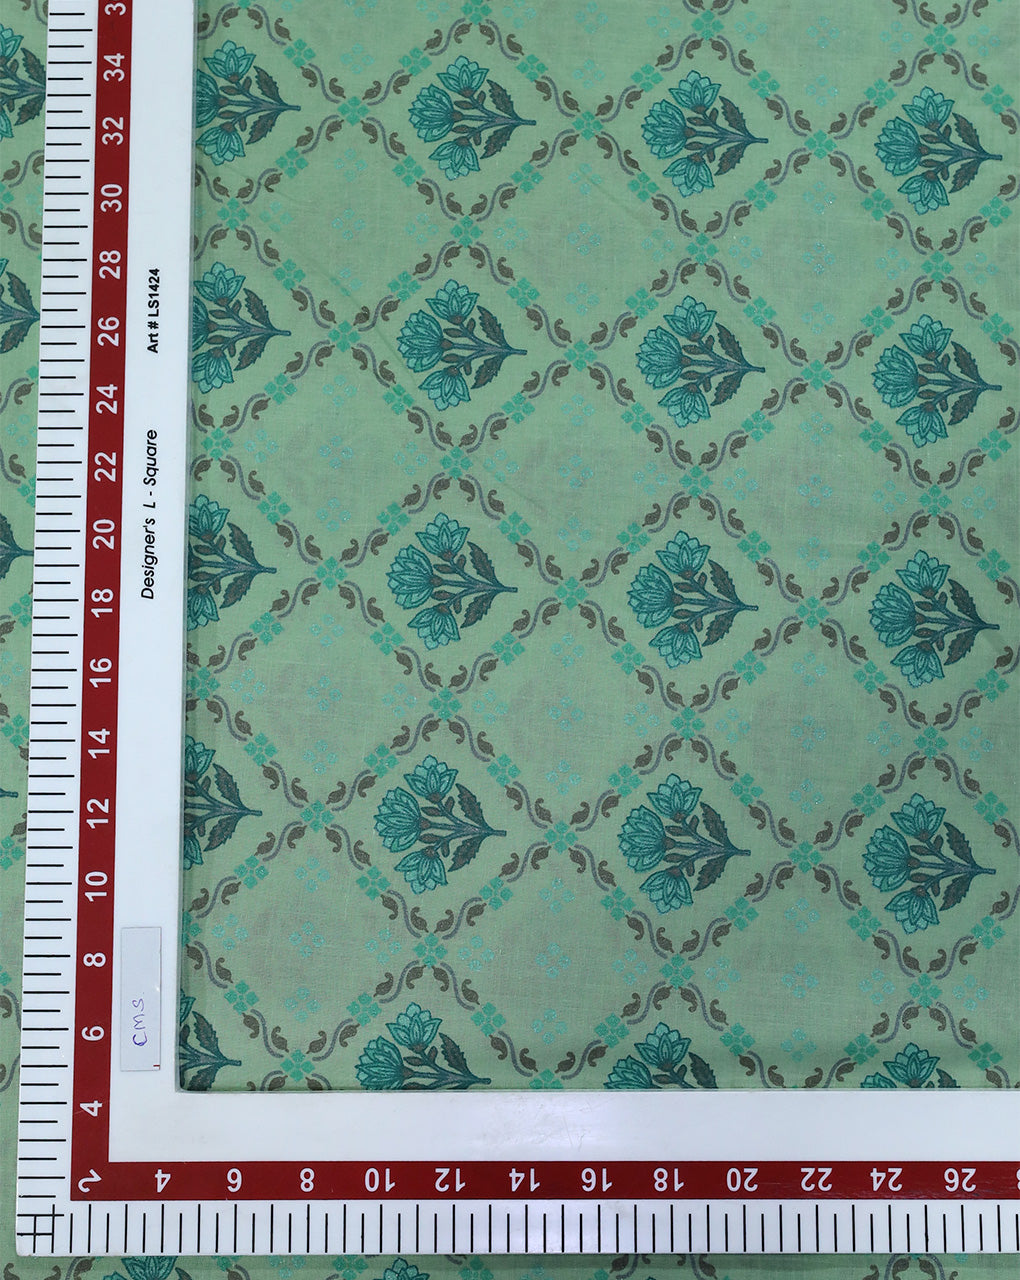 LIGHT GREEN FLORAL DESIGN COTTON PRINTED FABRIC